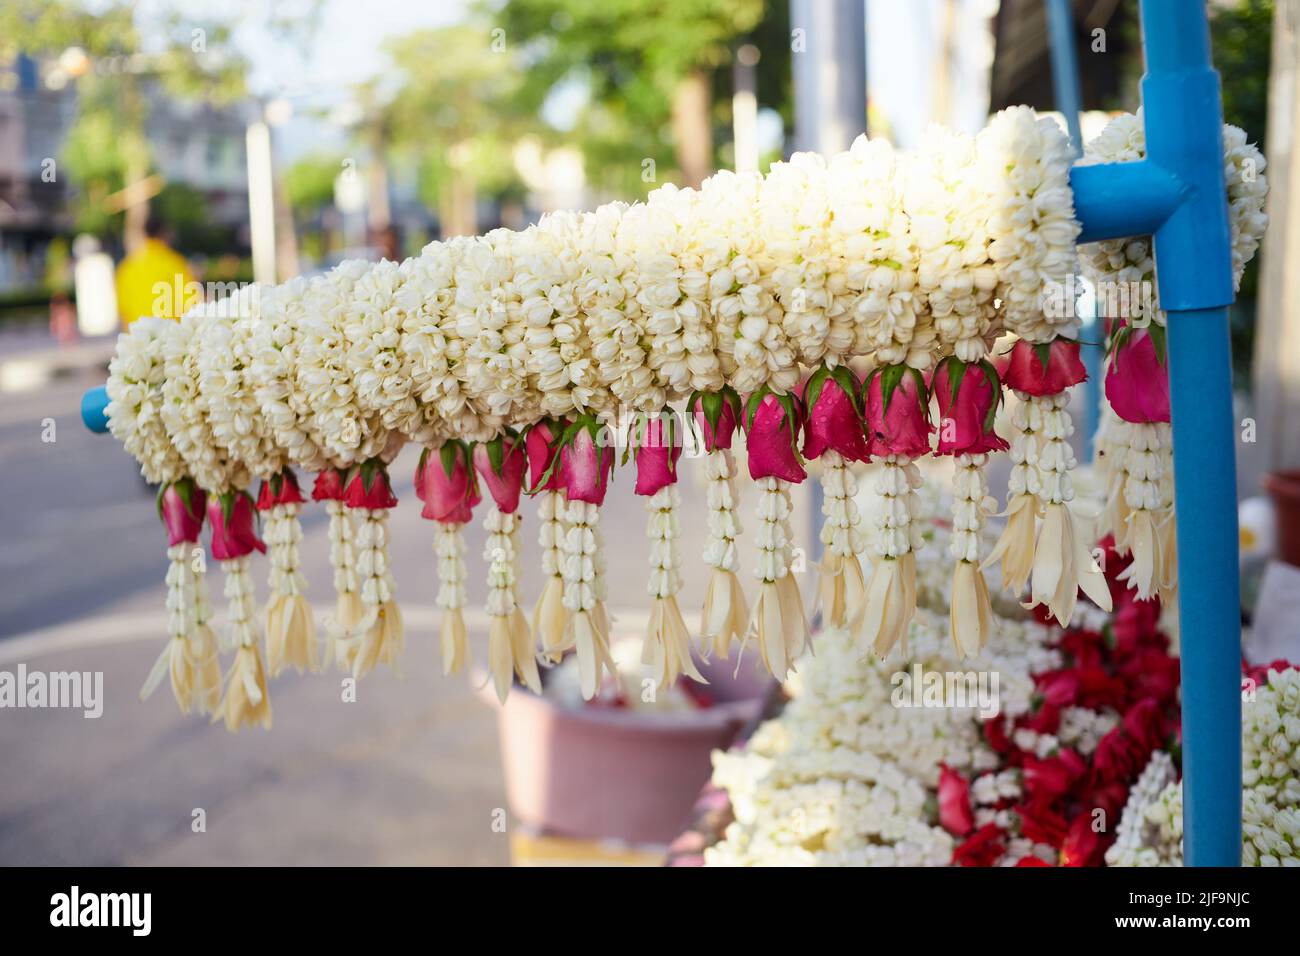 Fresh Jasmine mixed with red rose and crown flower garland hanging for sale at retail Stock Photo